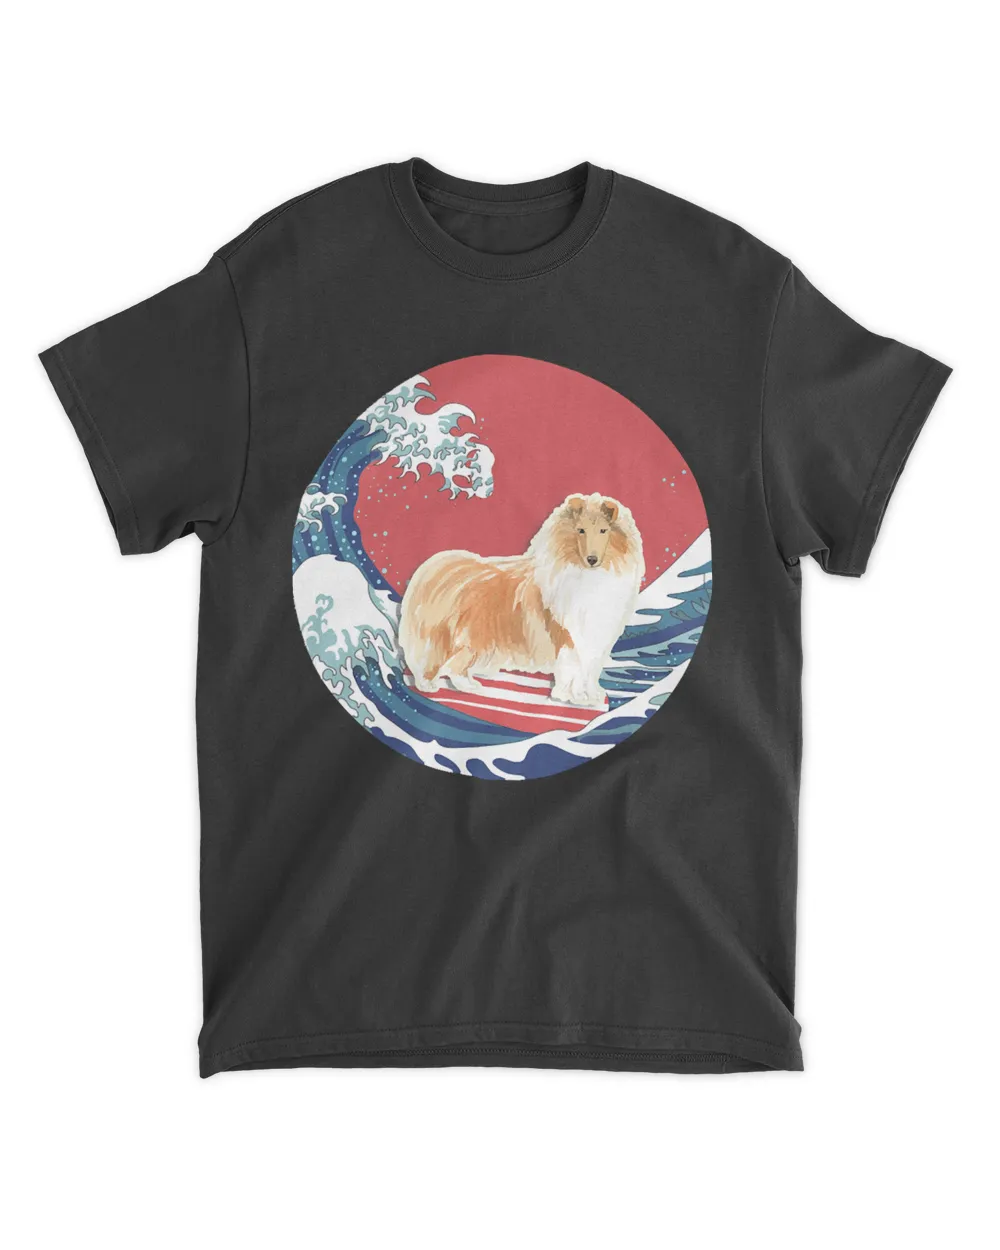 Rough Collie T- Shirt Rough Collie Gifts - Ocean Waves Surfing Rough Collie.  Gifts For Rough Collie Moms, Dads & Owners T- Shirt